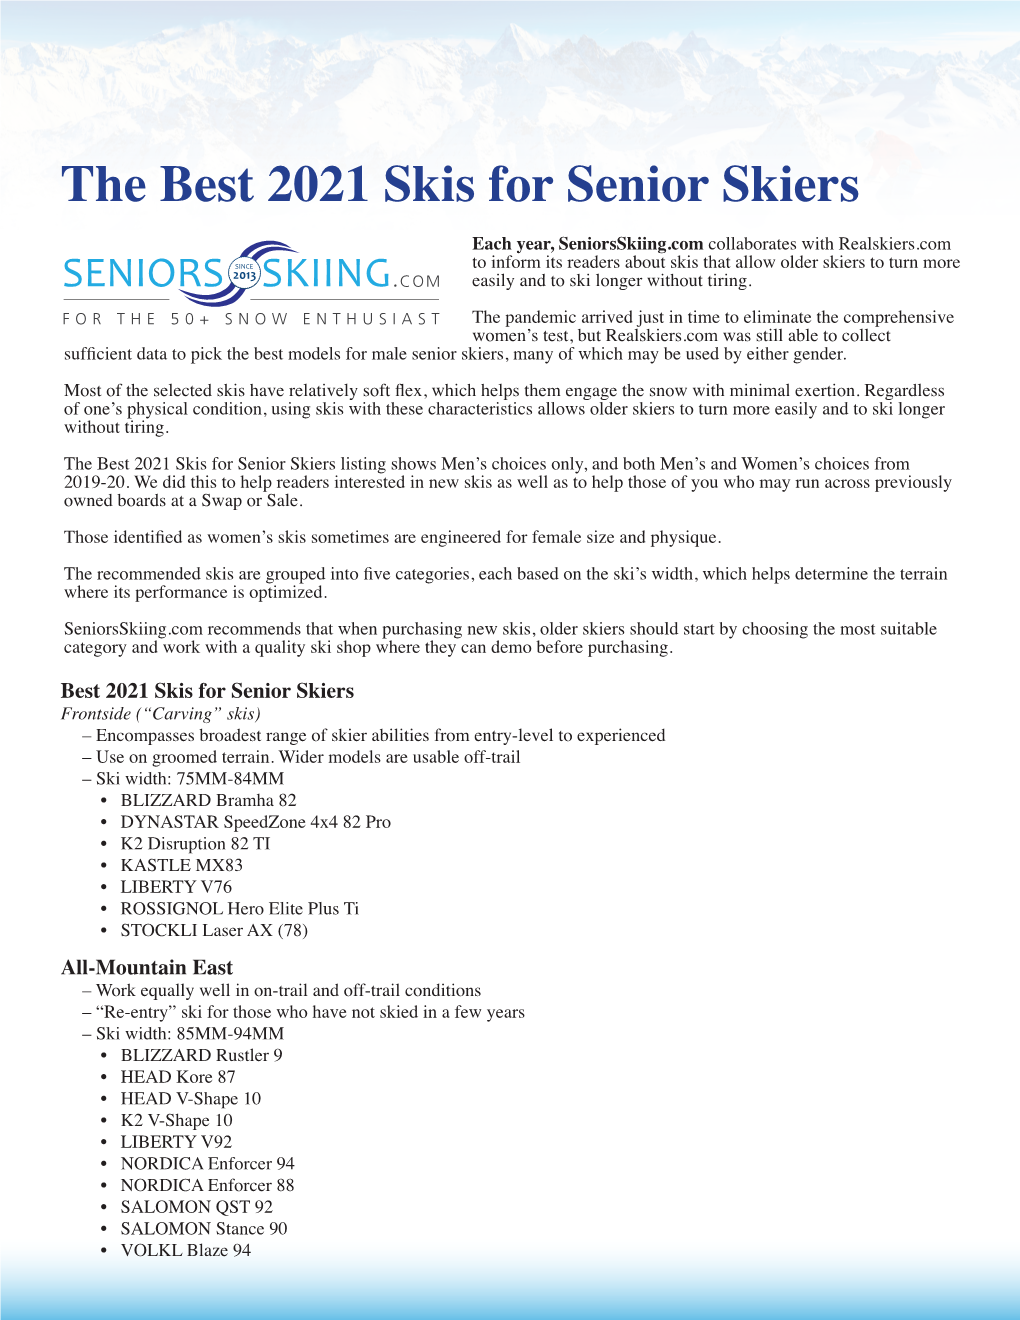 The Best 2021 Skis for Senior Skiers